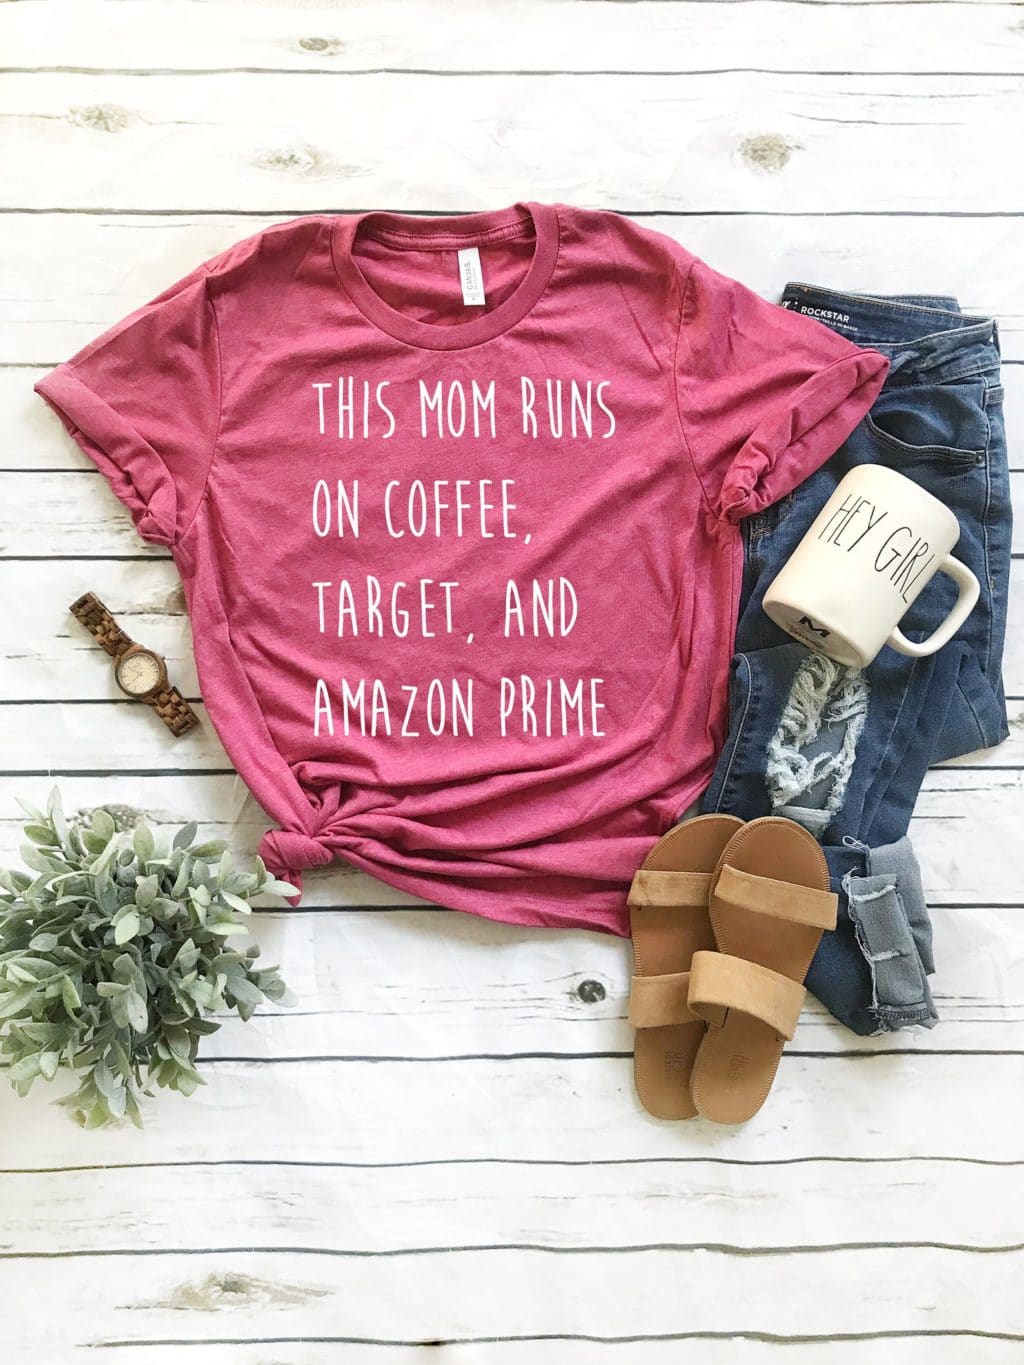 This Mom runs on Coffee, Target and Amazon Prime T-shirt